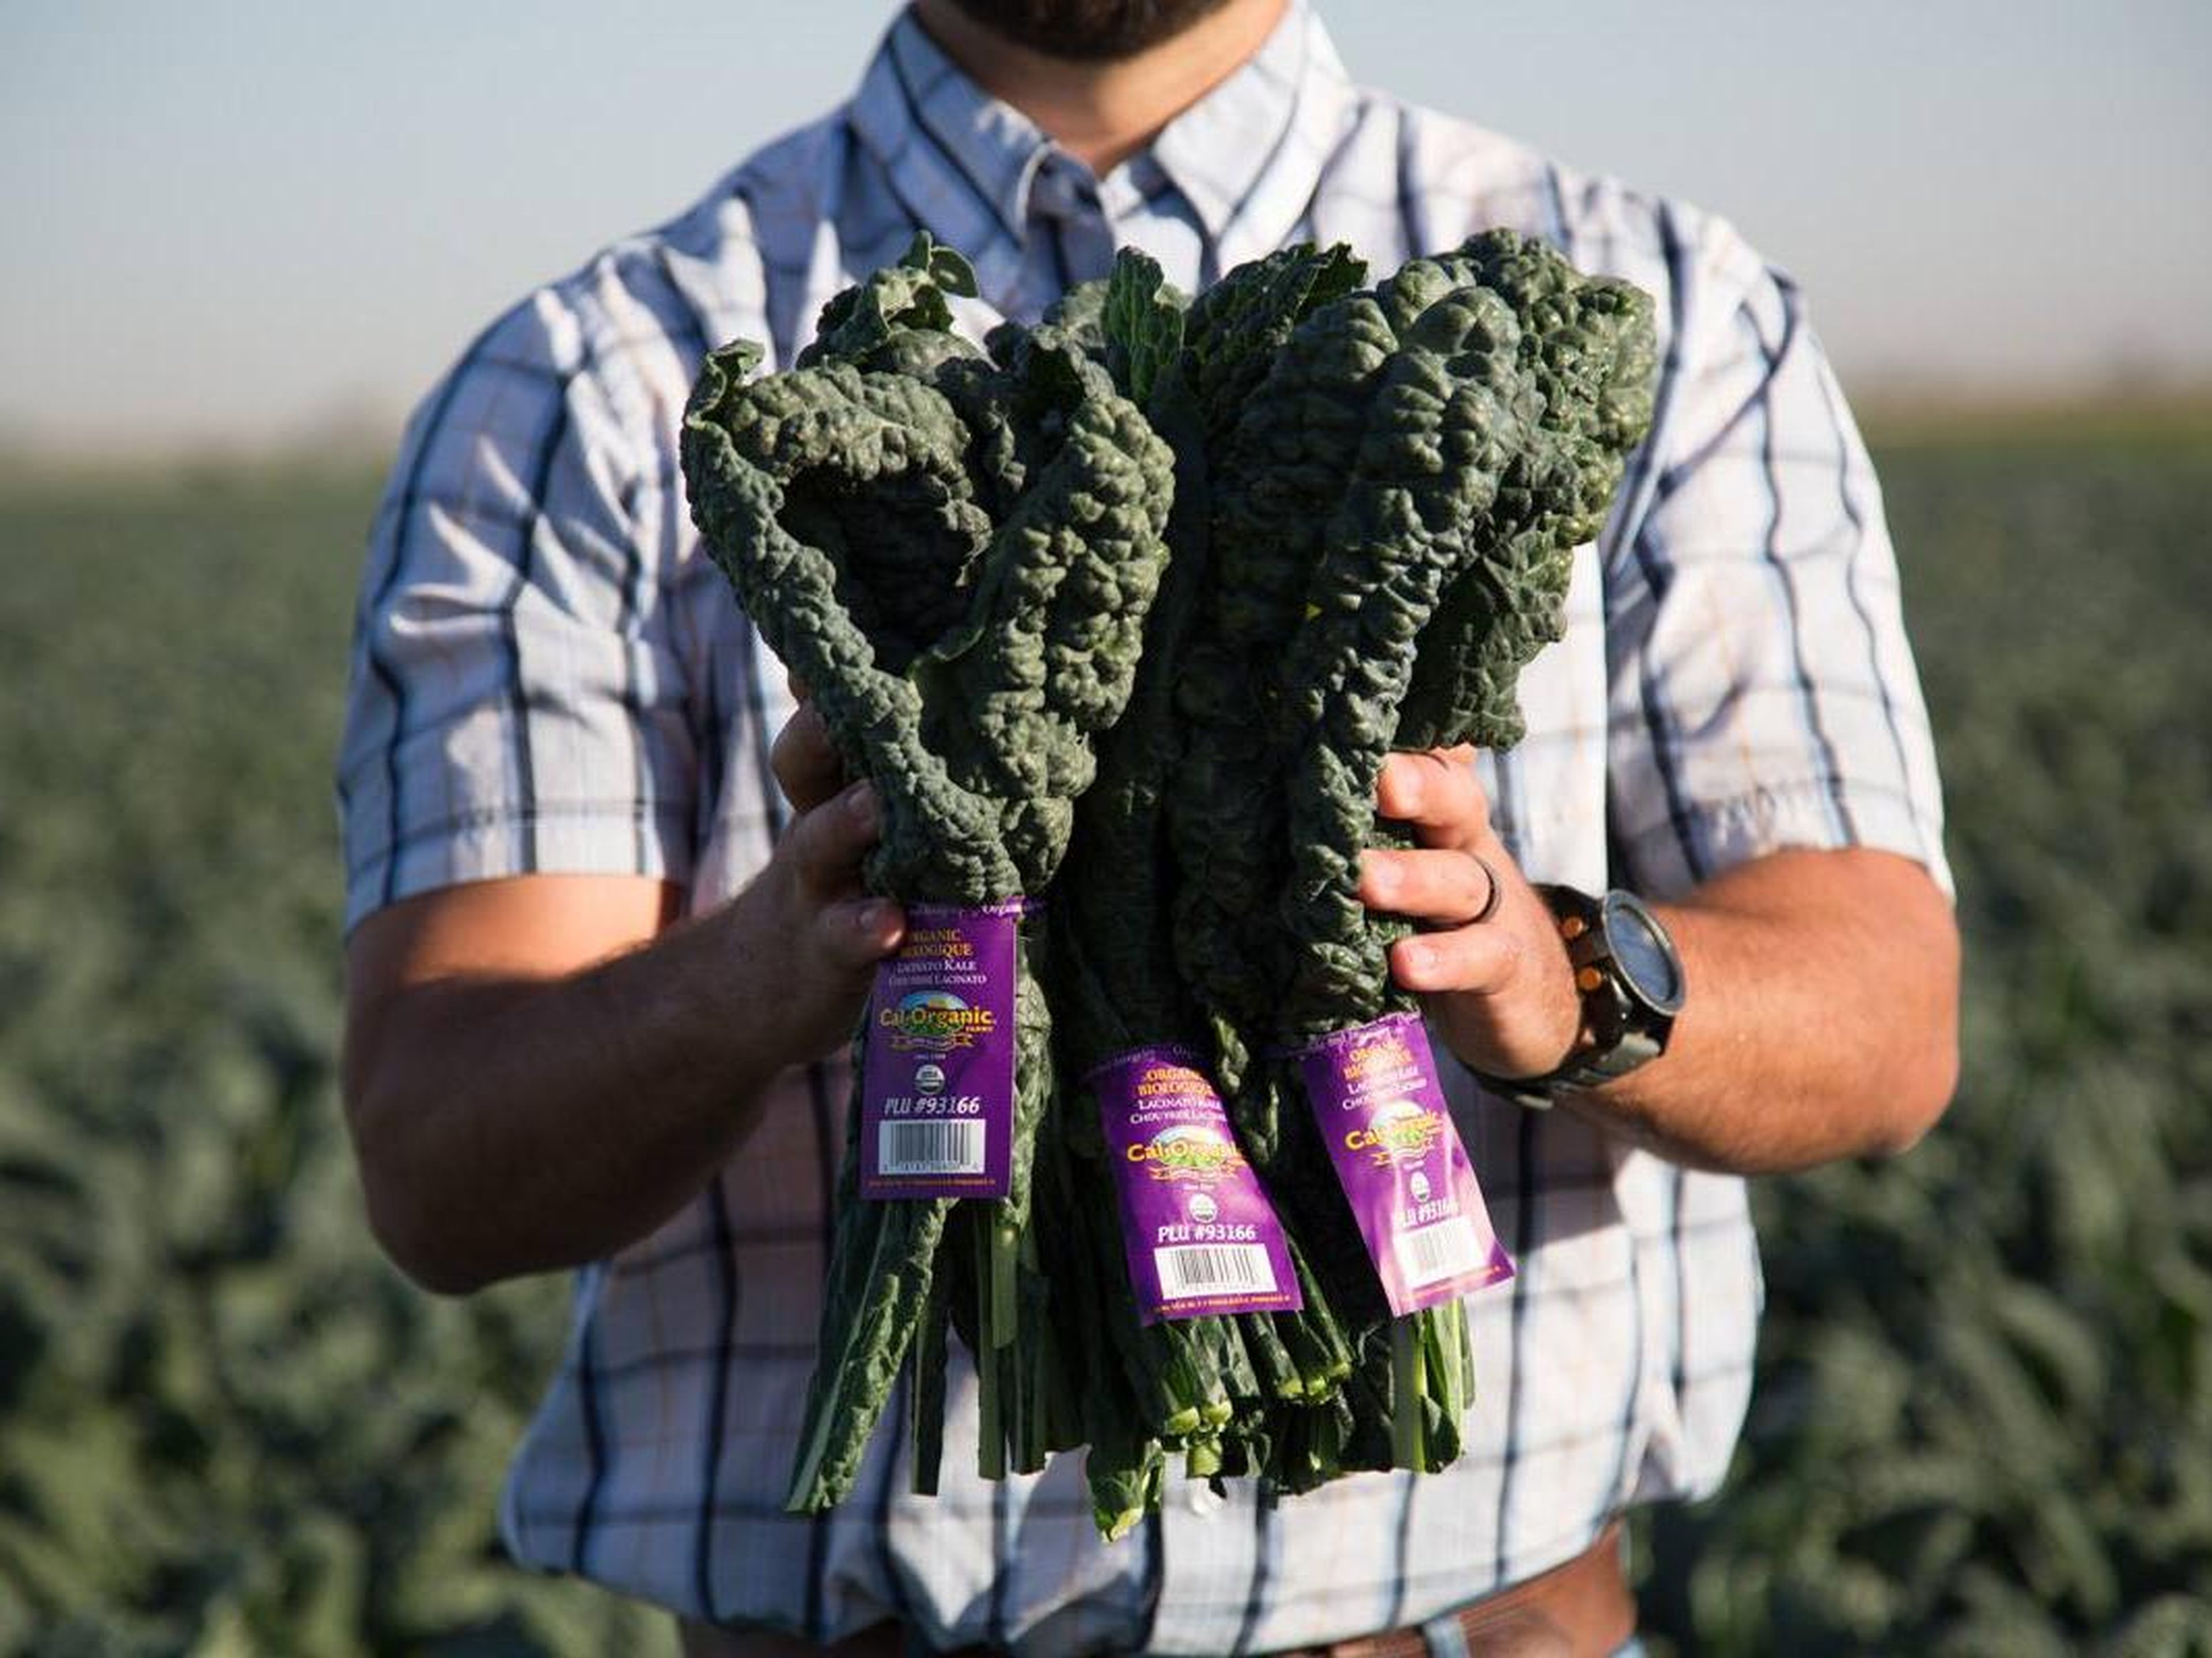 A cup of kale gives you nearly 700% of your daily allowance of vitamin K.